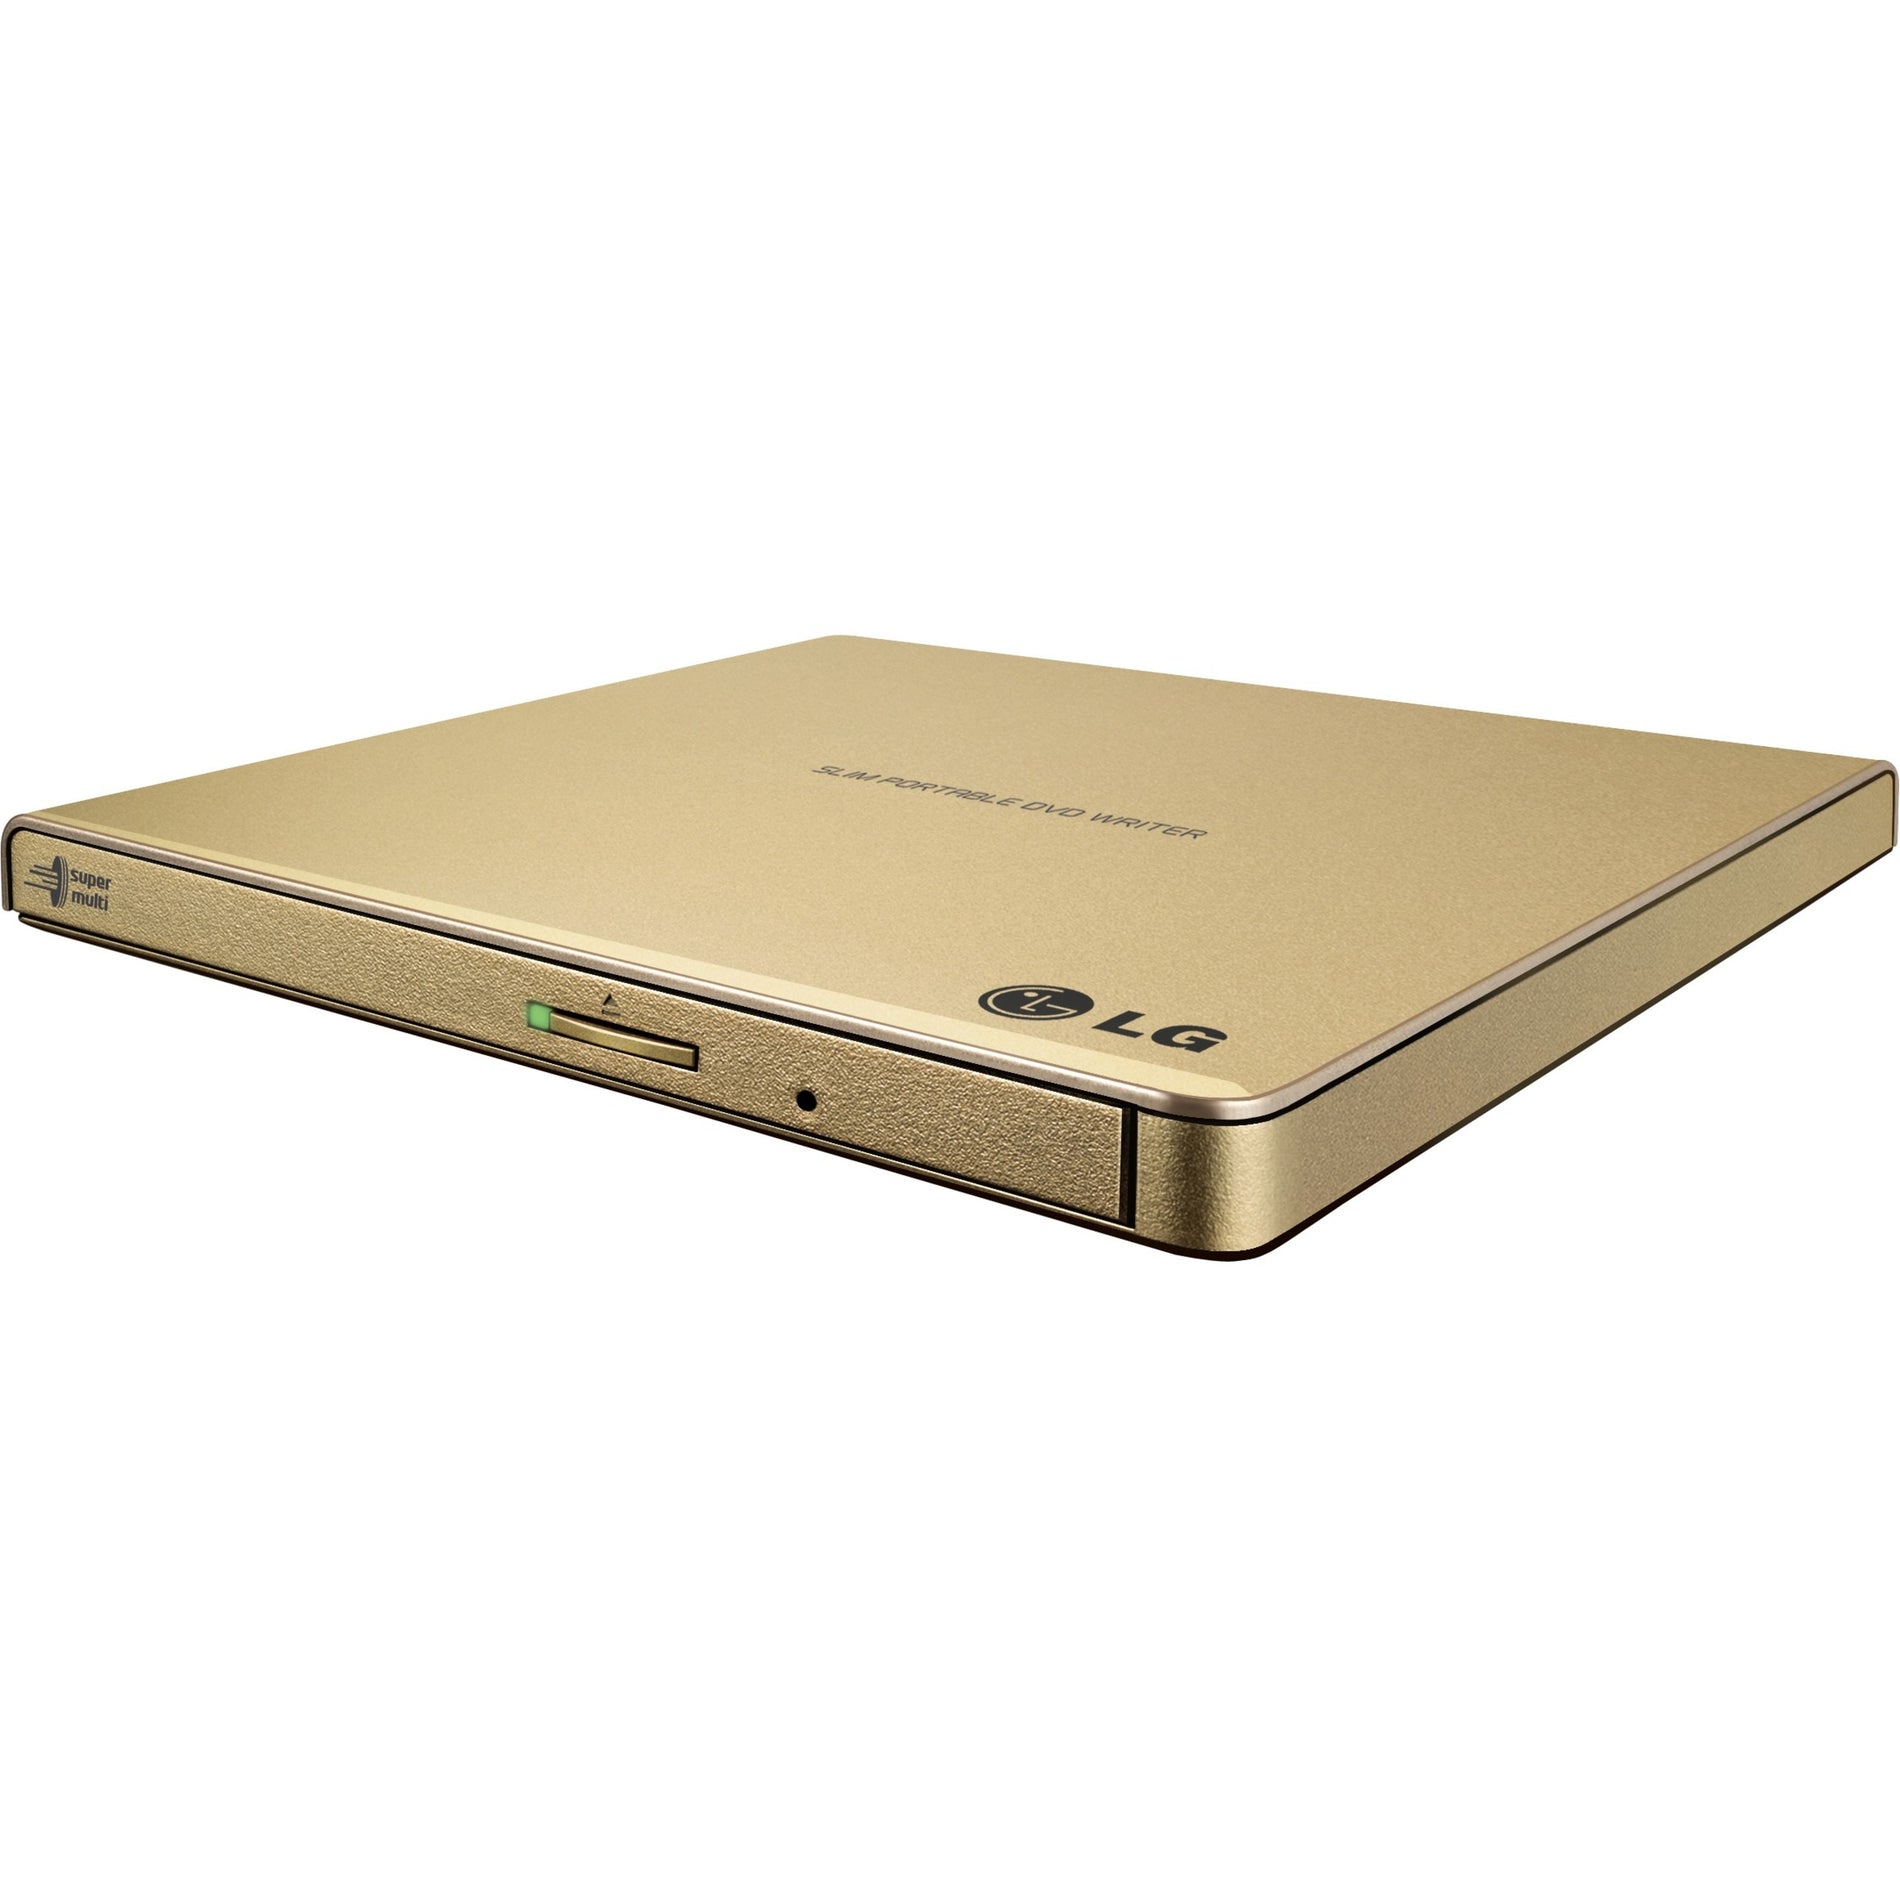 LG GP65NG60 Ultra-Slim Portable DVD Burner & Drive with M-DISC Support, External, Gold